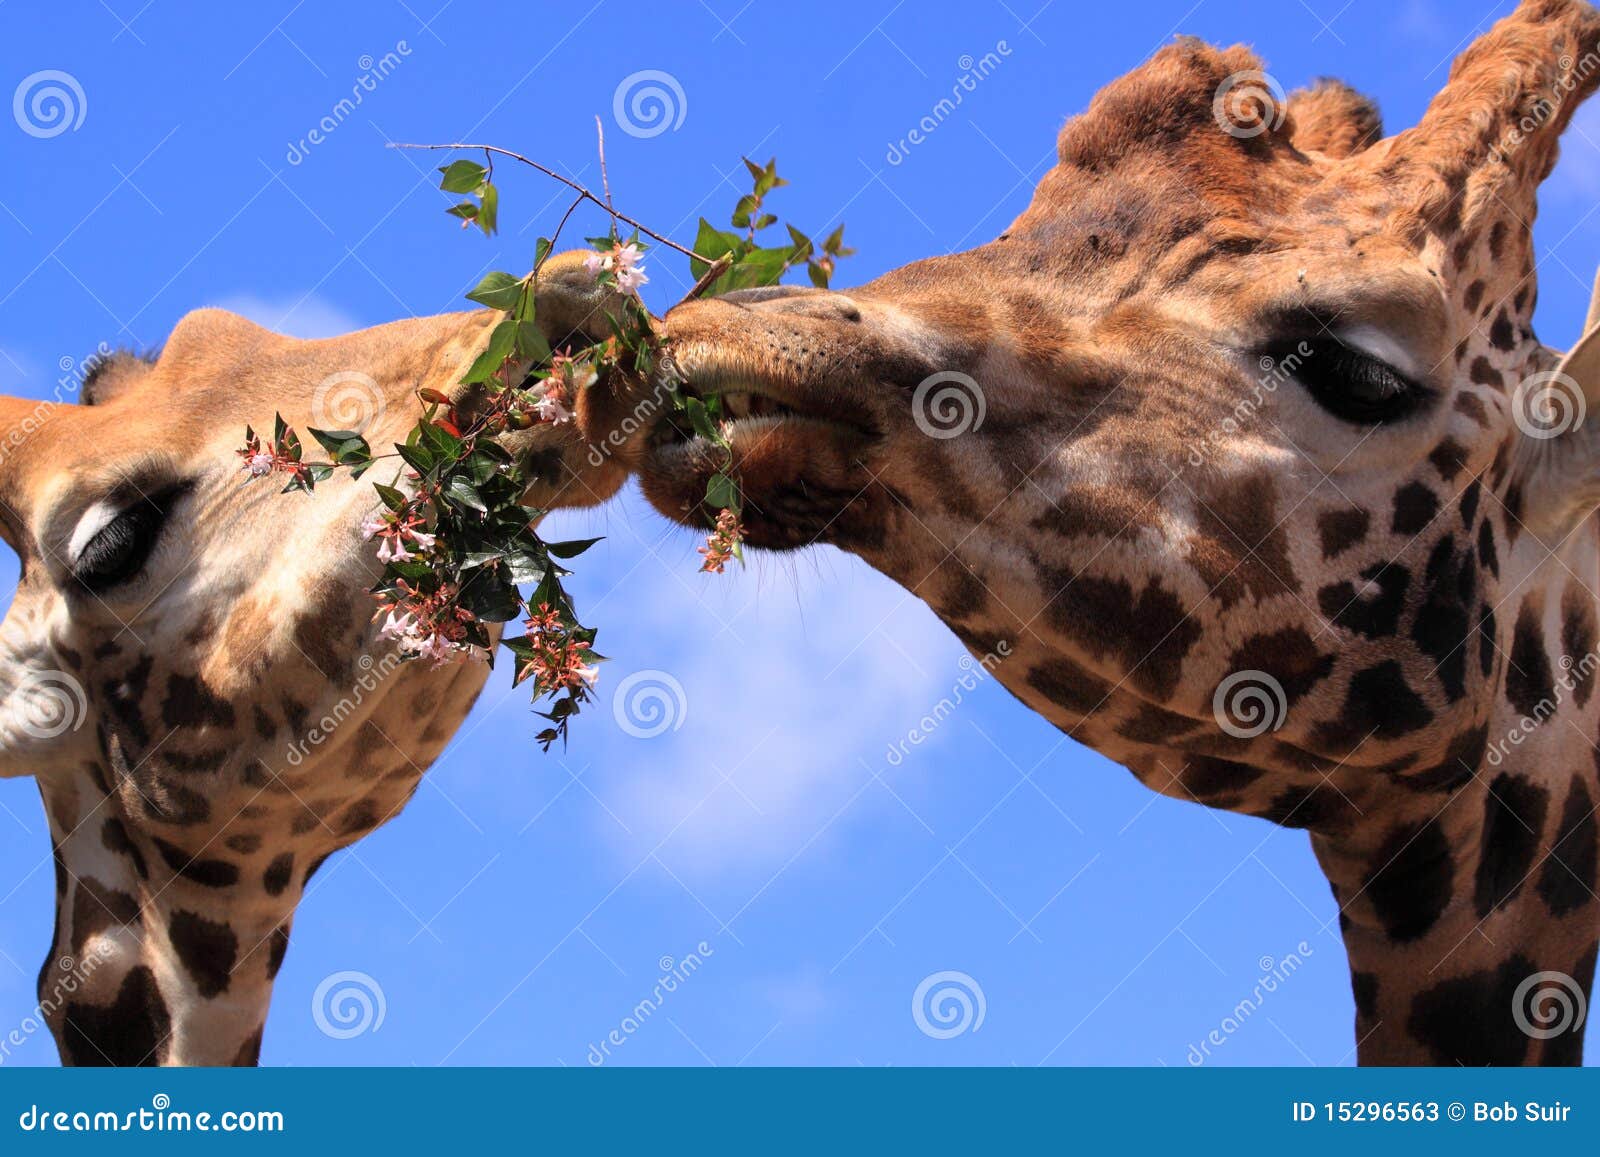 funny giraffes animals eating together